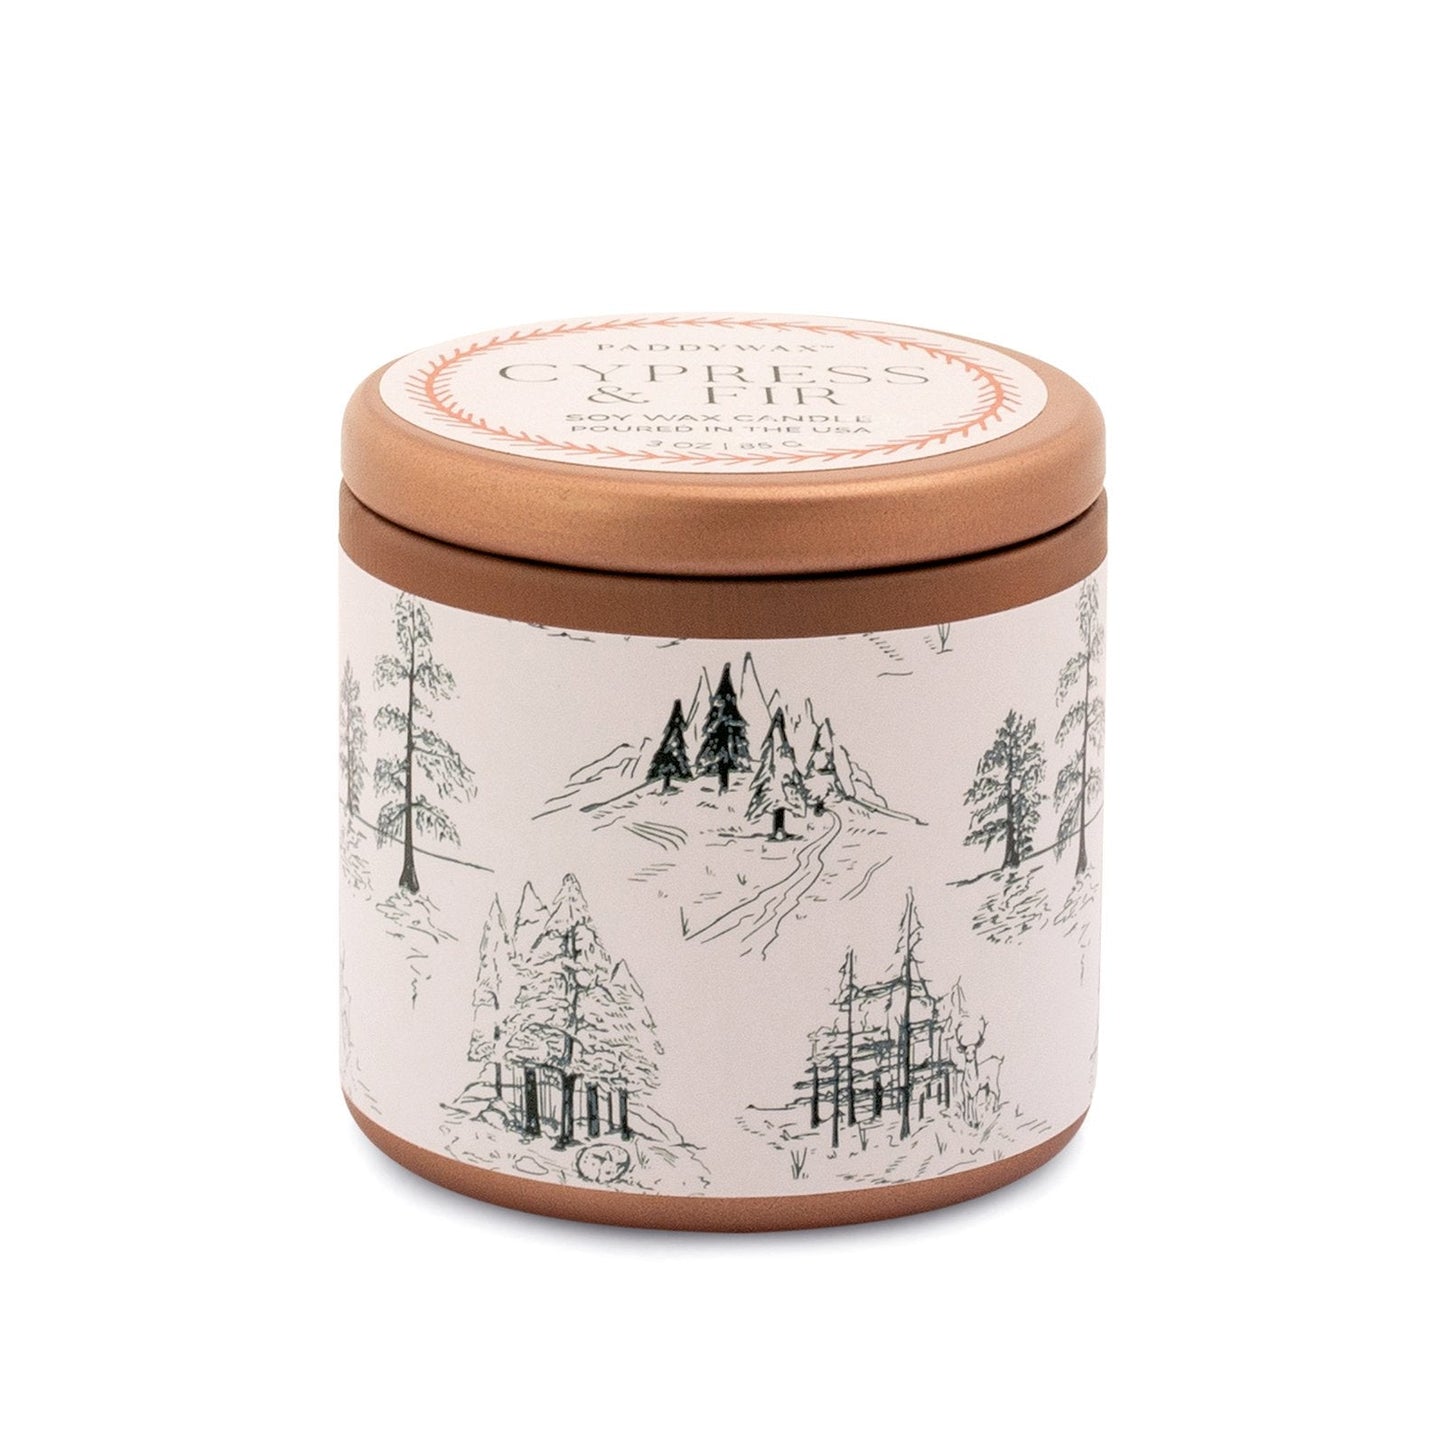 Cypress & Fir - Copper Tin + White Label With Green Toile Pattern (85g)